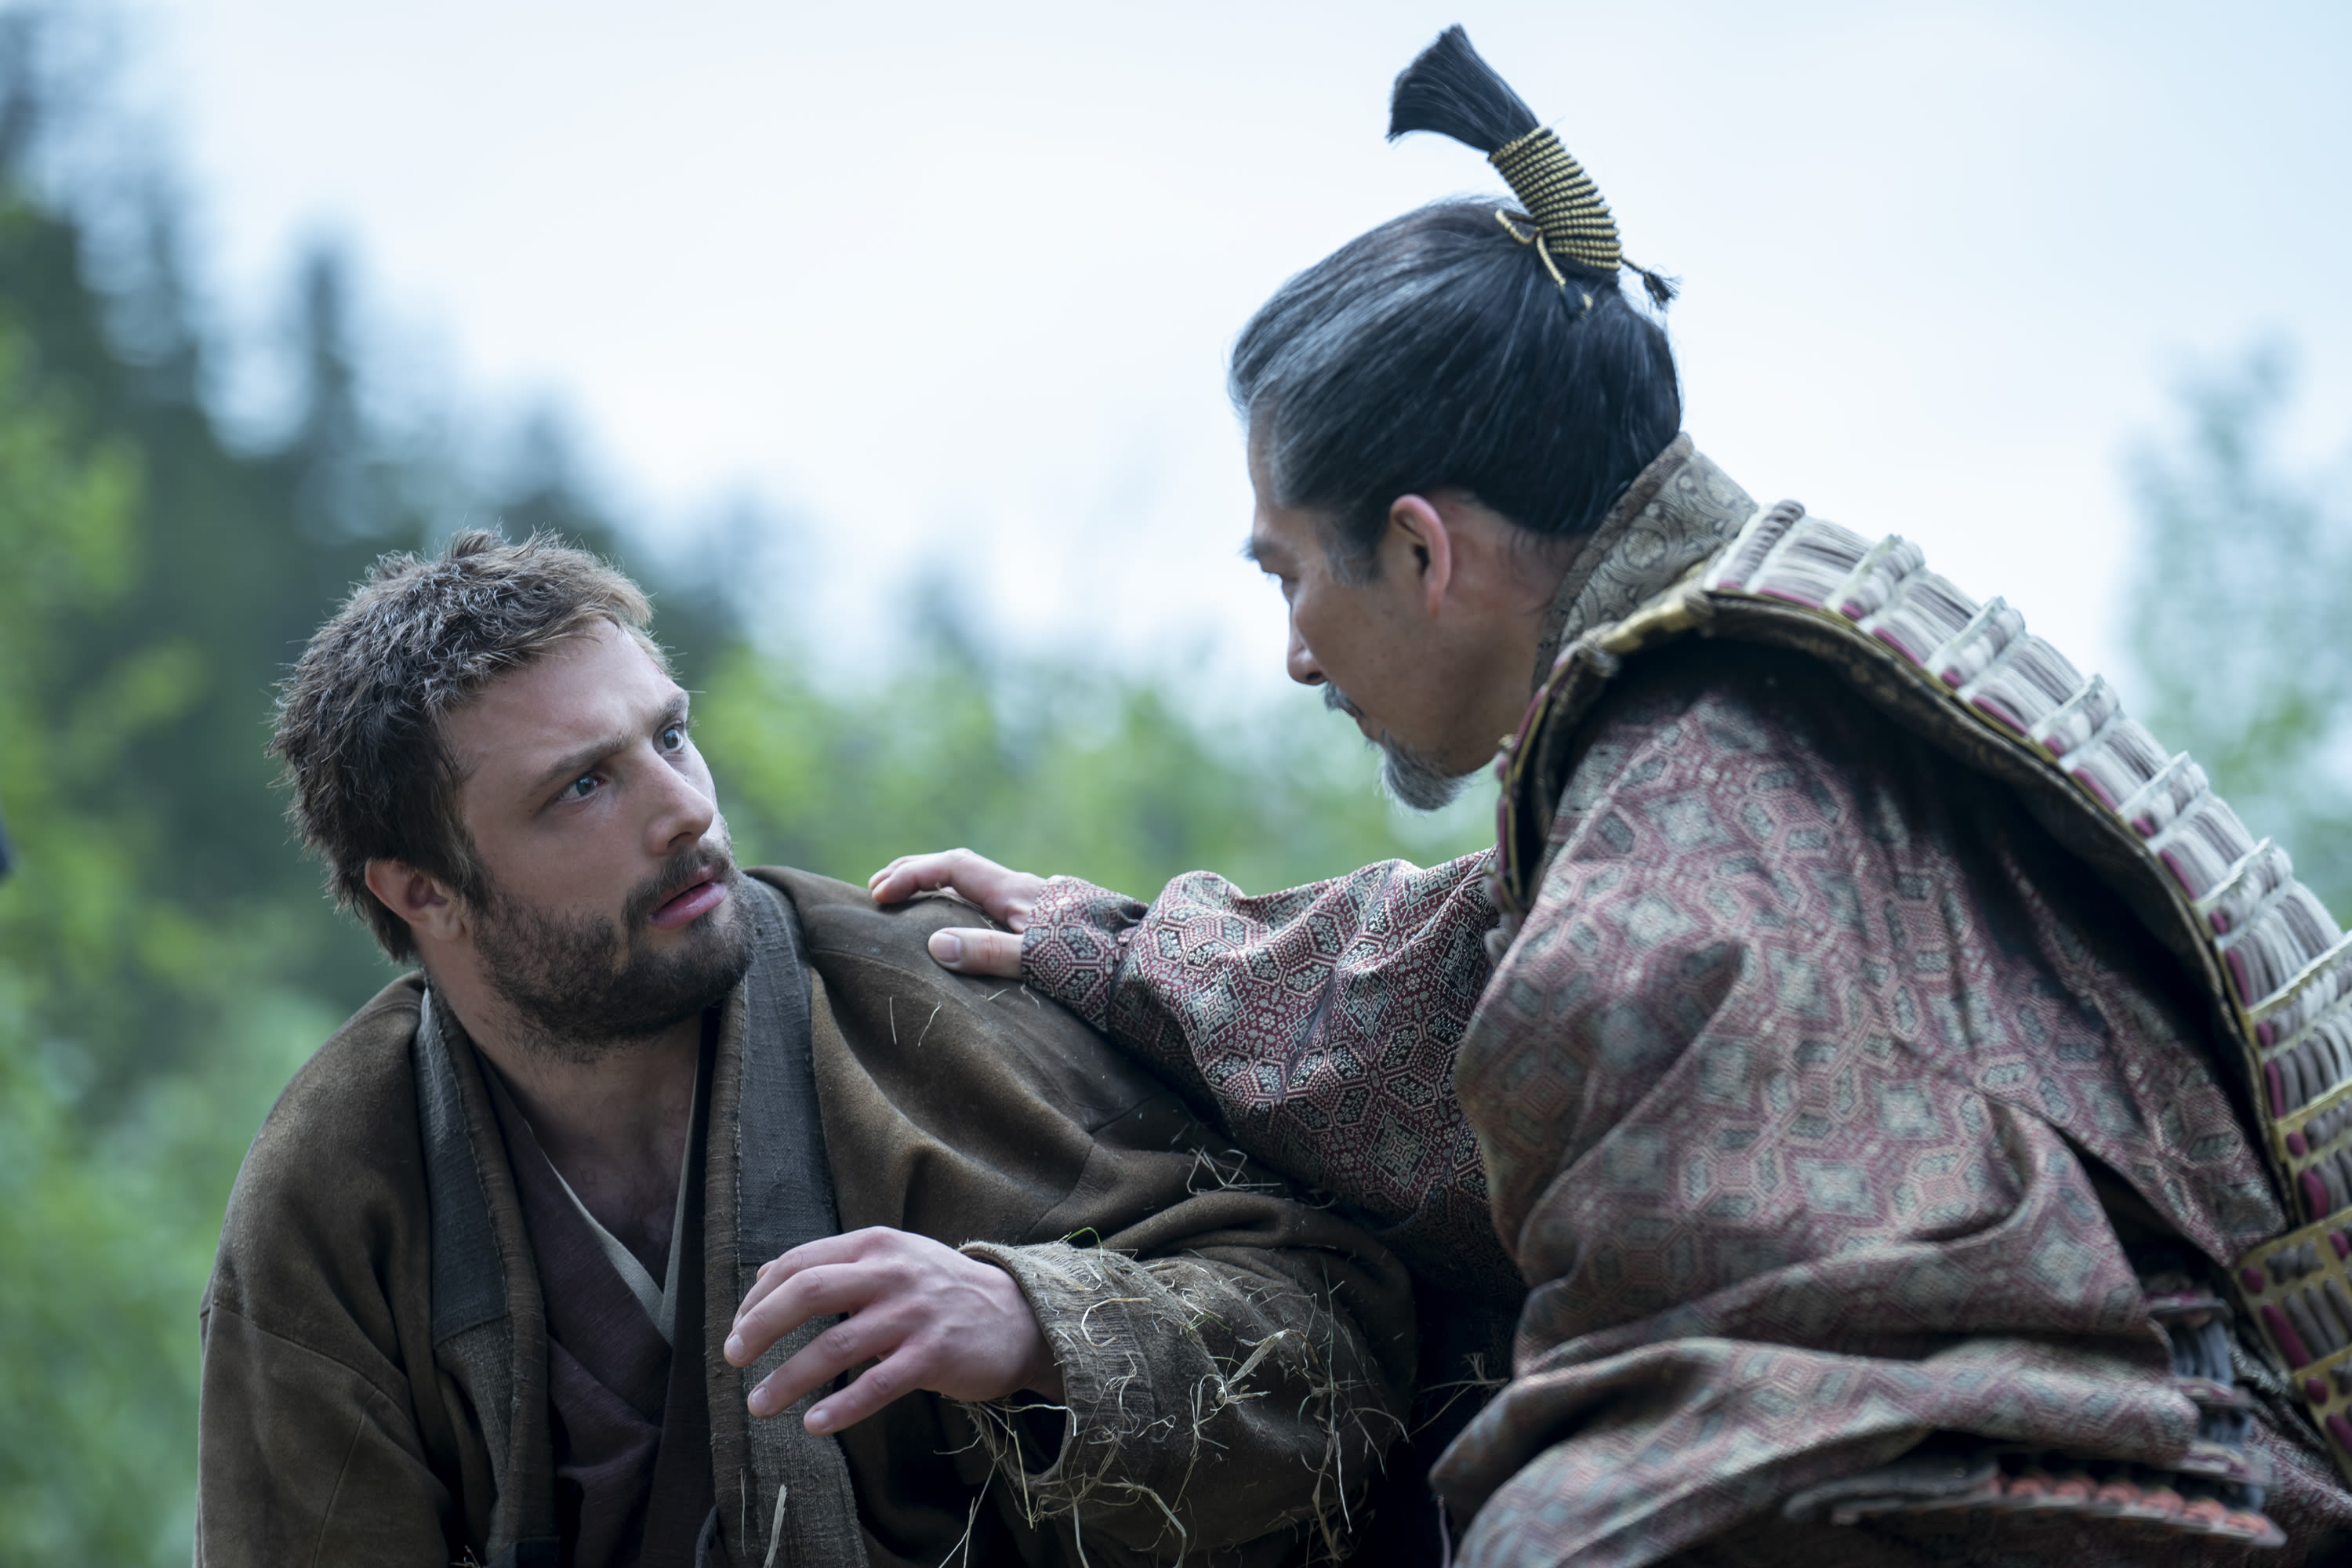 Can ‘Shogun’ Save the Emmys from Itself?